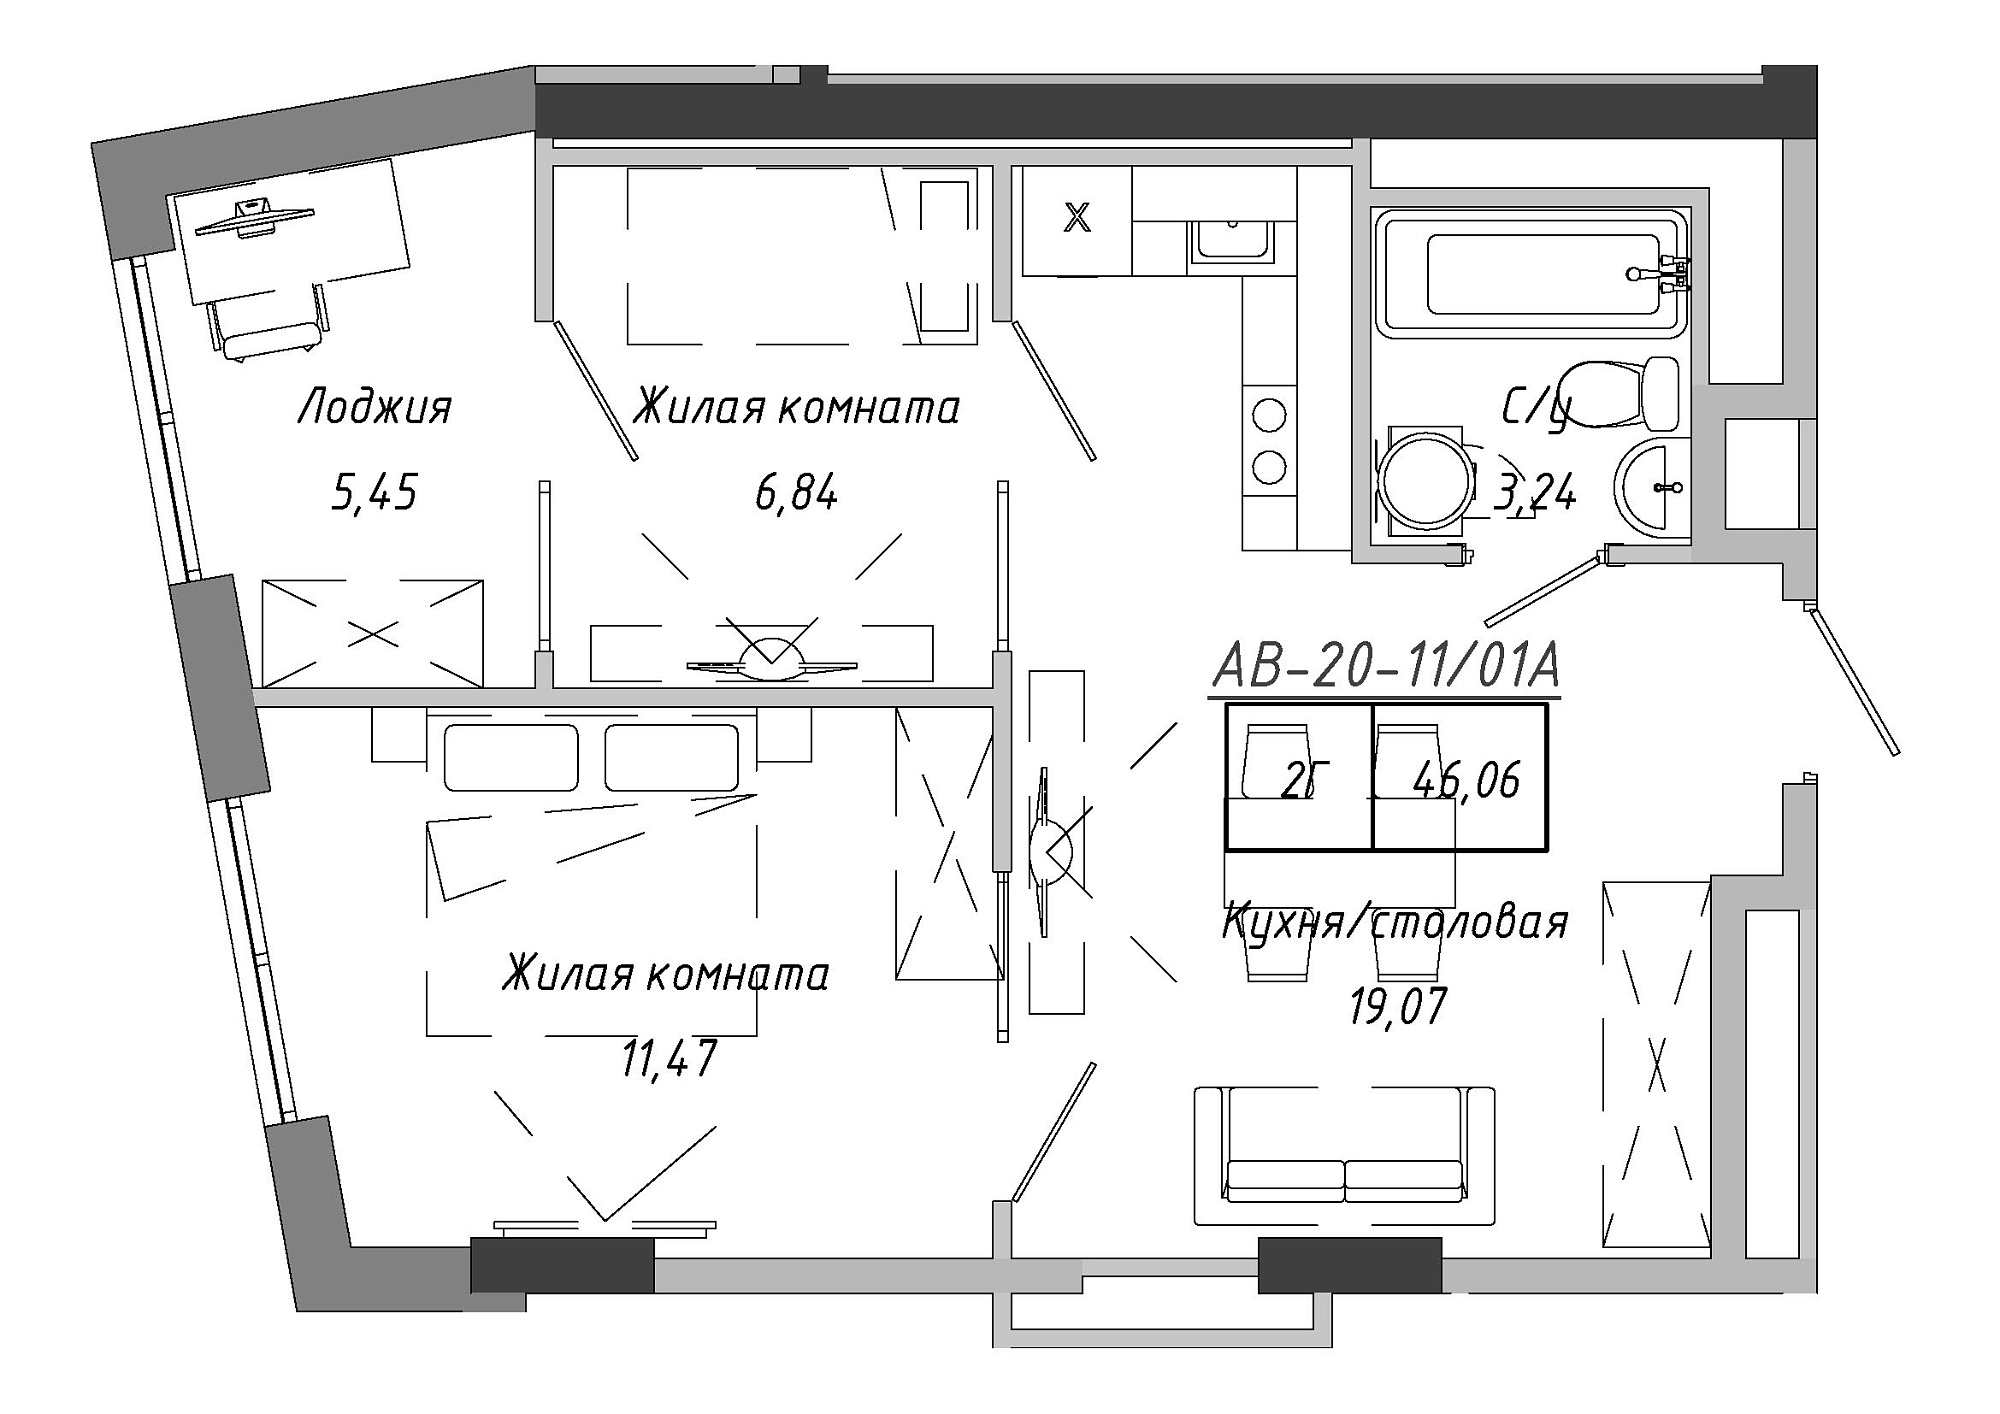 Planning 2-rm flats area 45.99m2, AB-20-11/0001а.